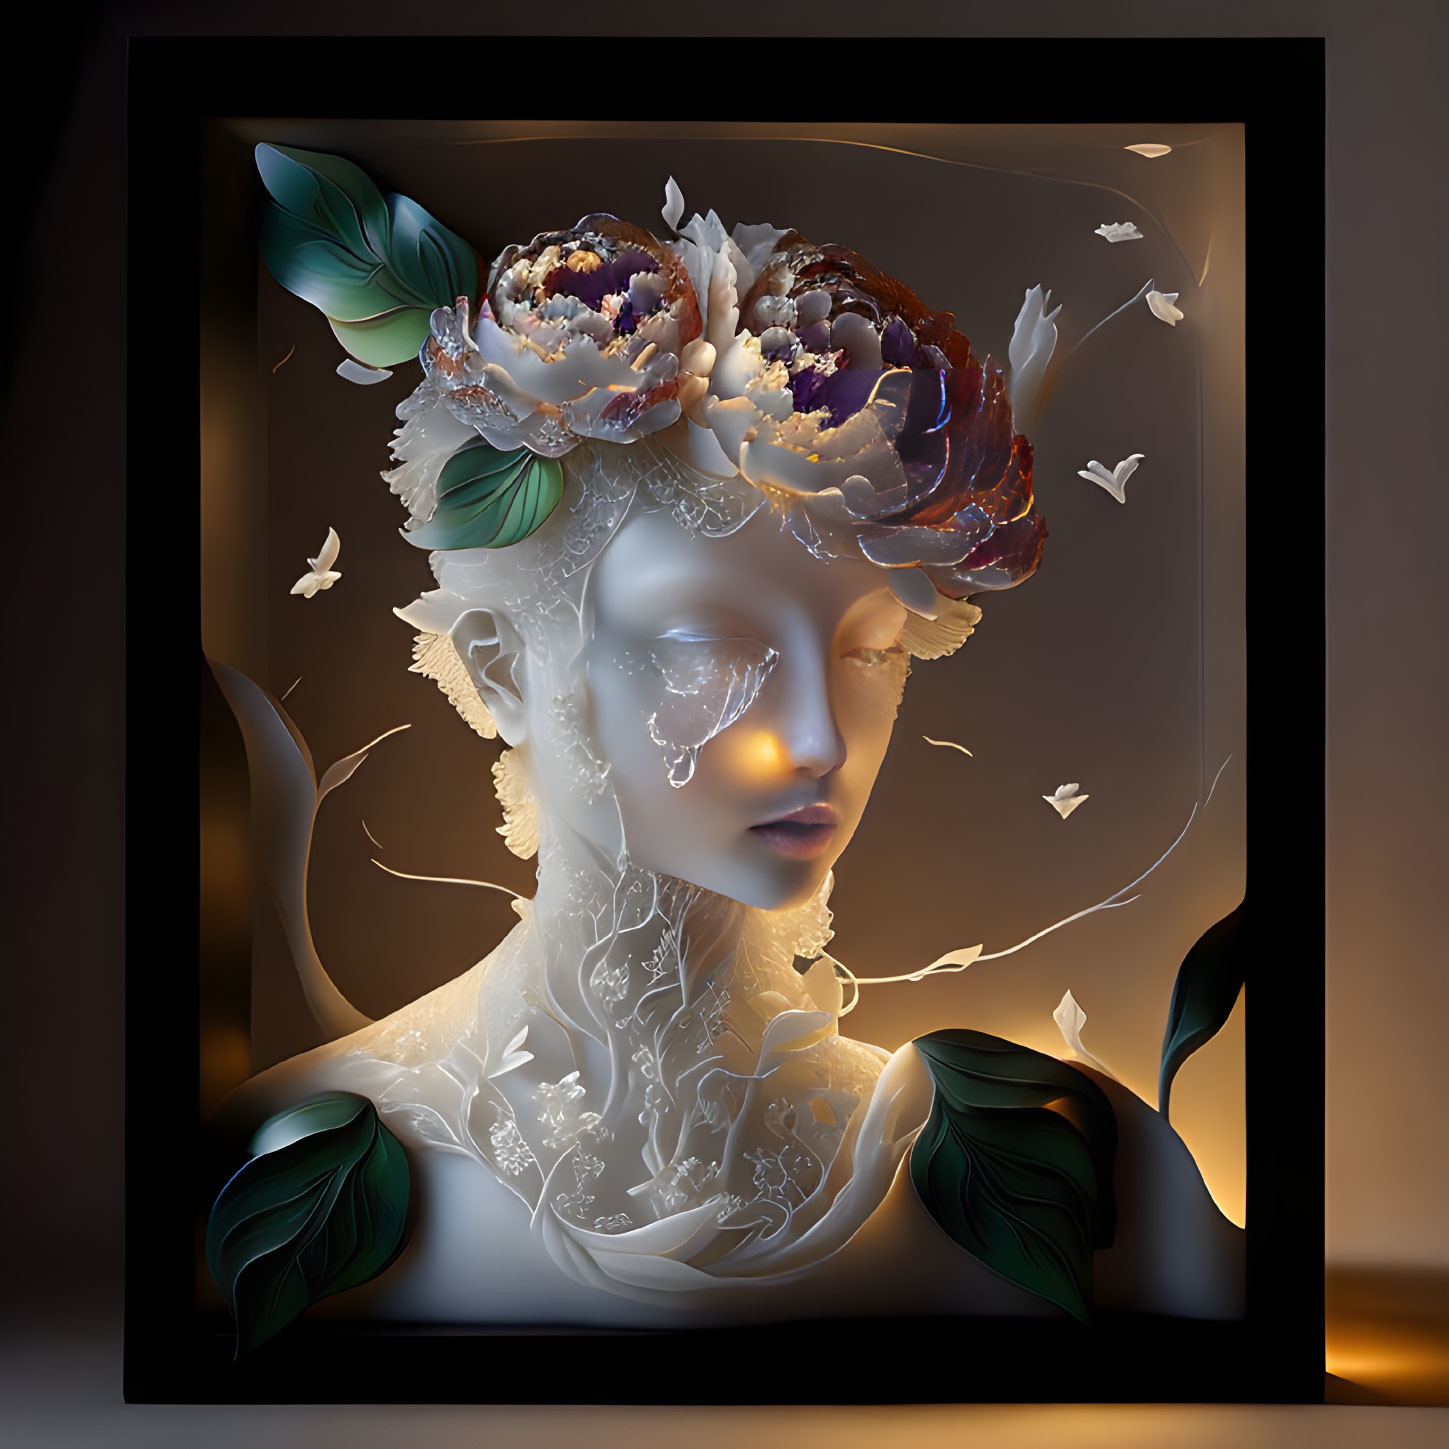 Surreal art: Serene face with florals and butterflies in dark ambiance